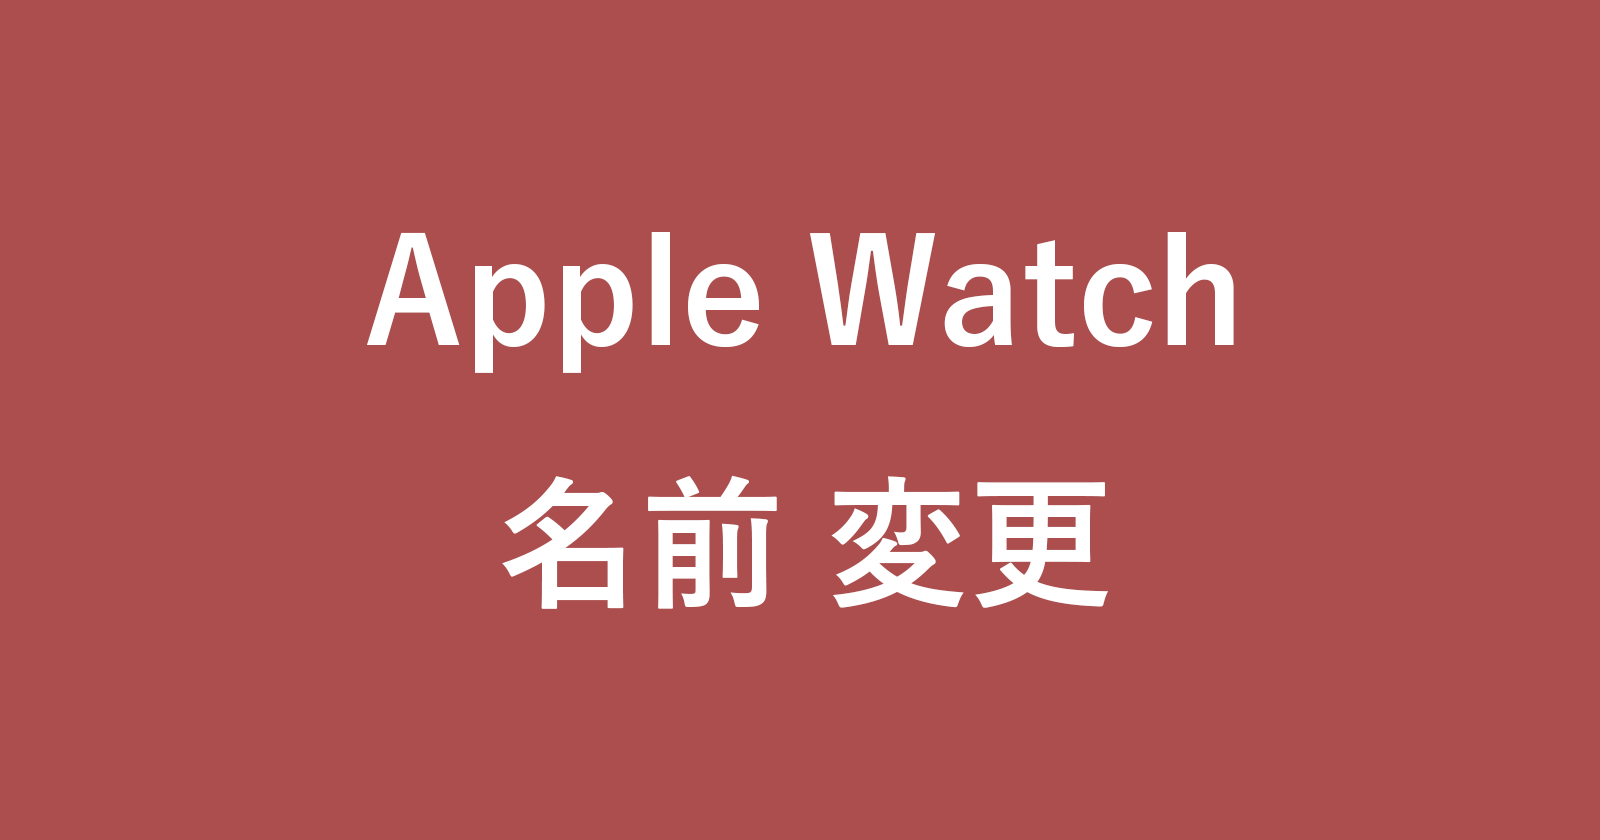 apple watch name